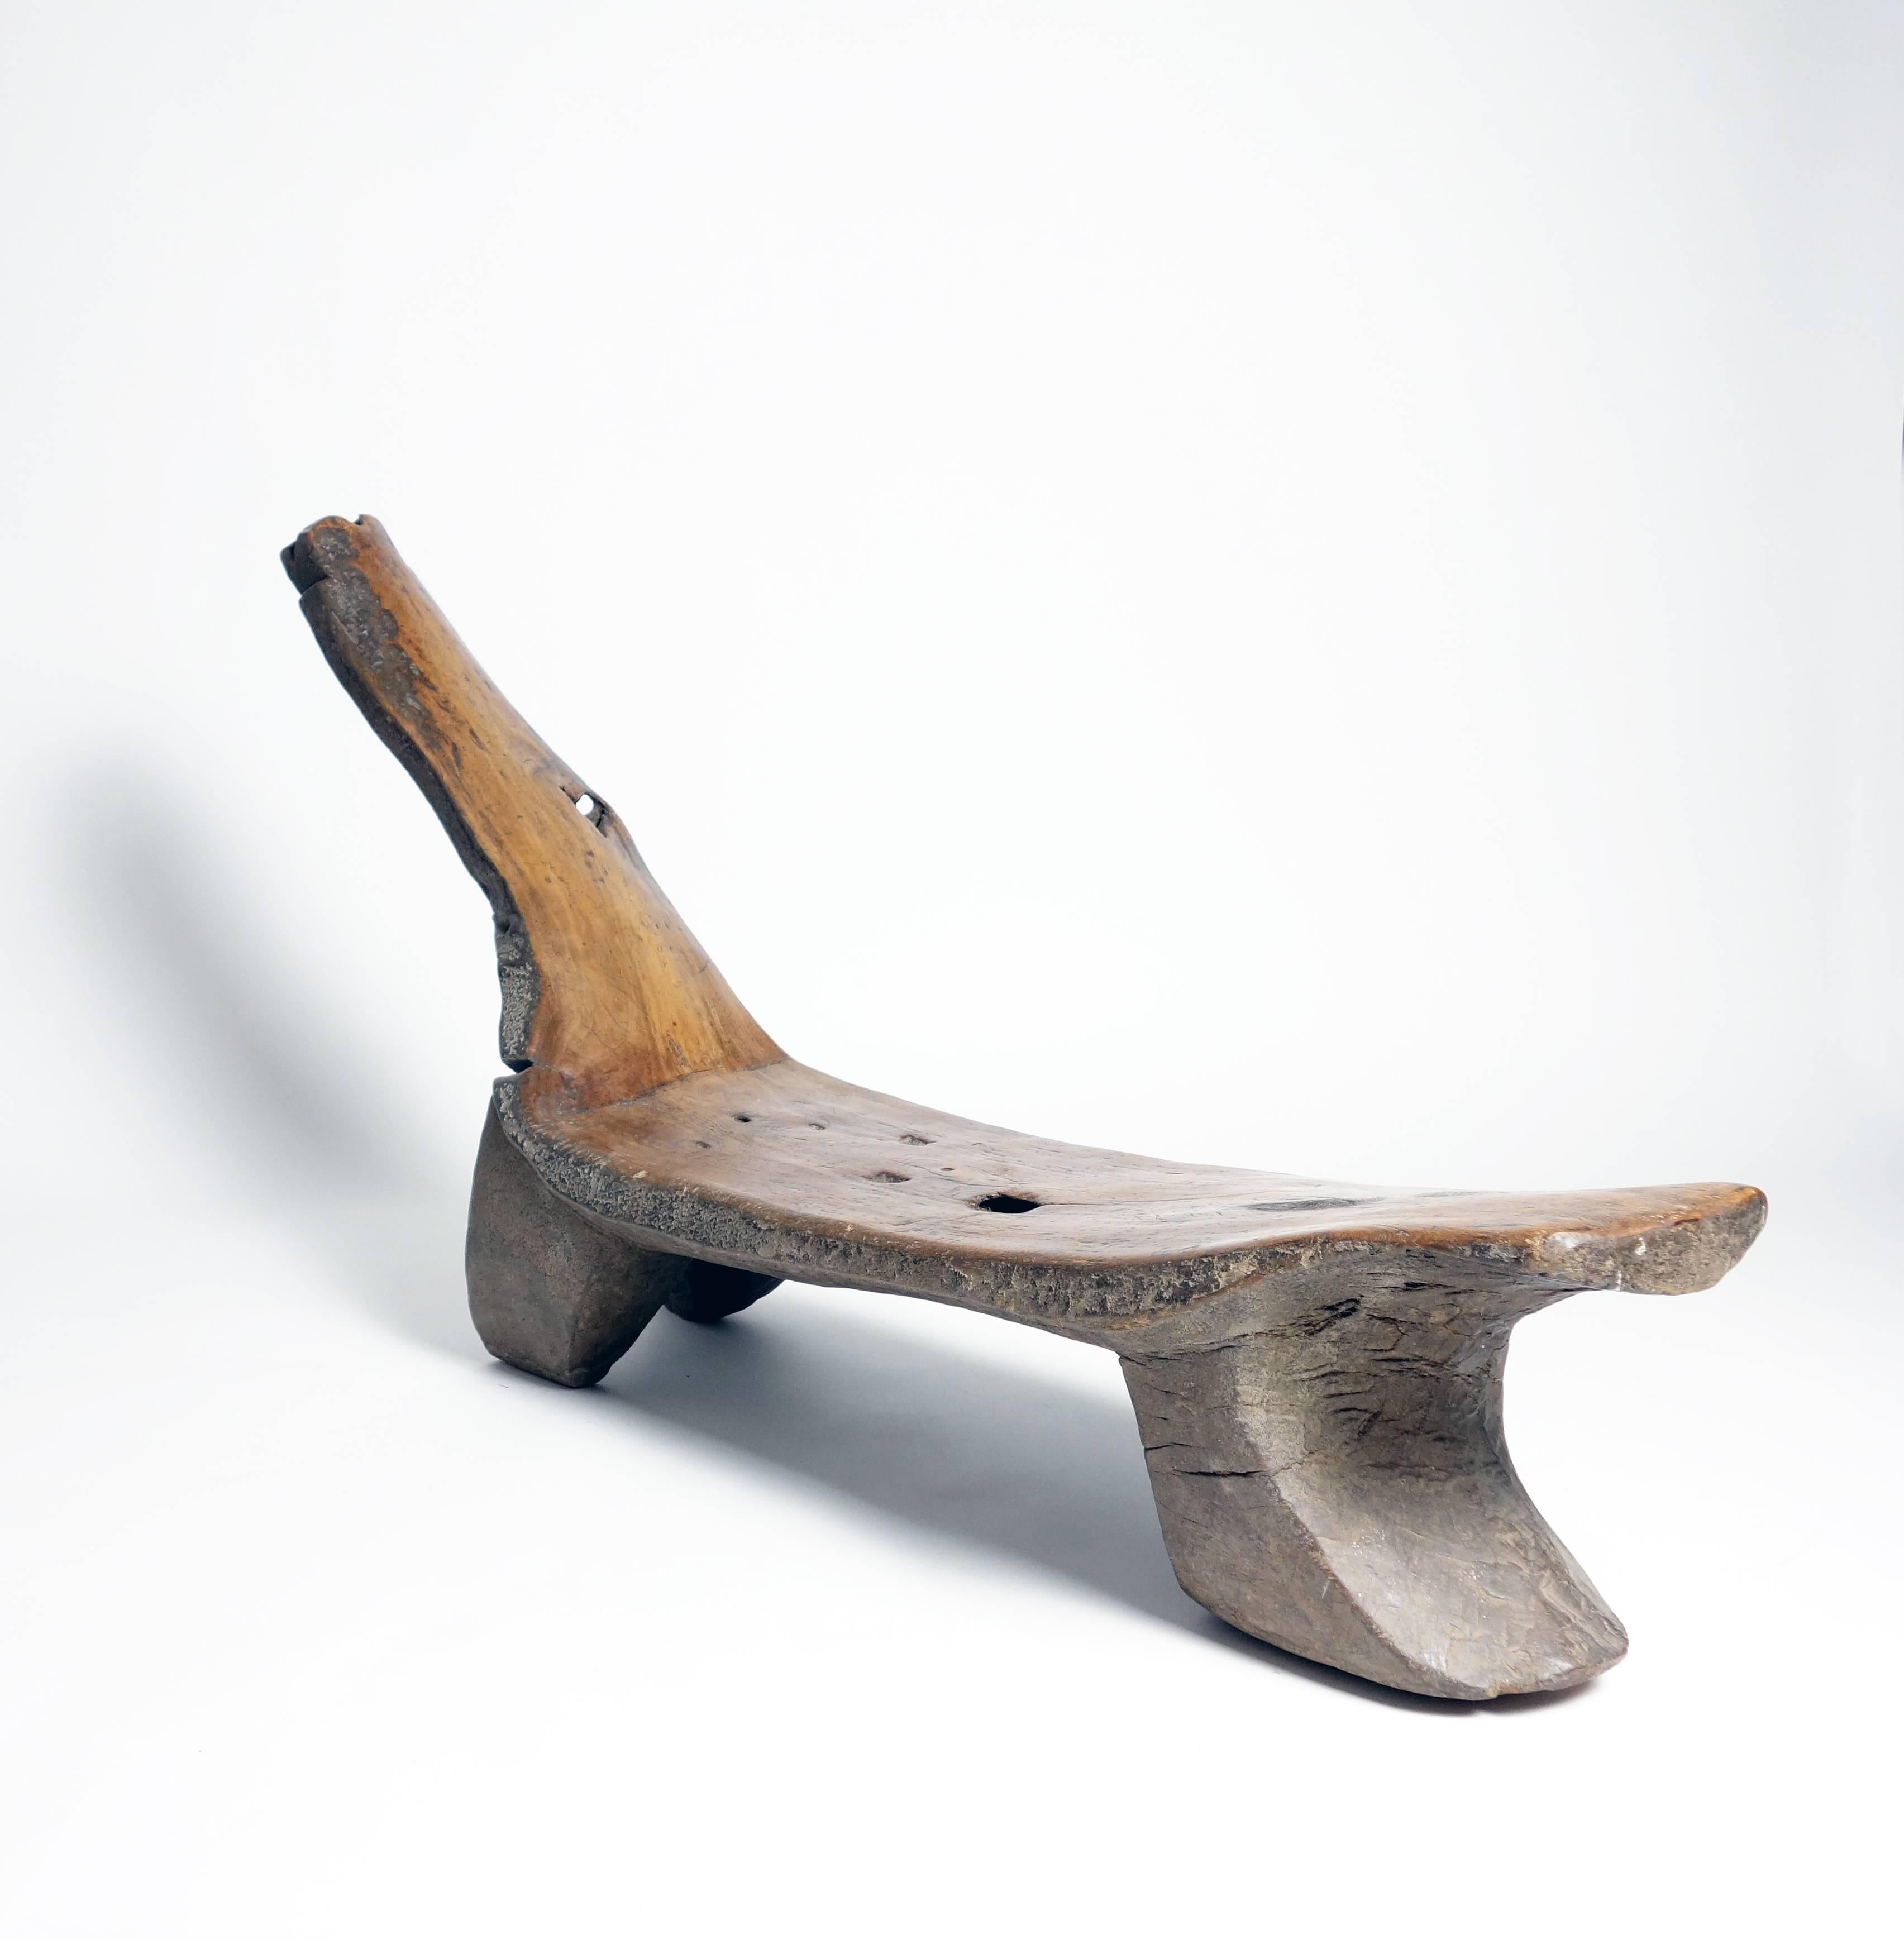 This dynamic daybed was carved of a single dense log, and its form seems to follow the growth habit of the tree. The seat and back are smooth with a fine and beautiful figuration and patina, the sides and bottom contrast with a rougher and darker